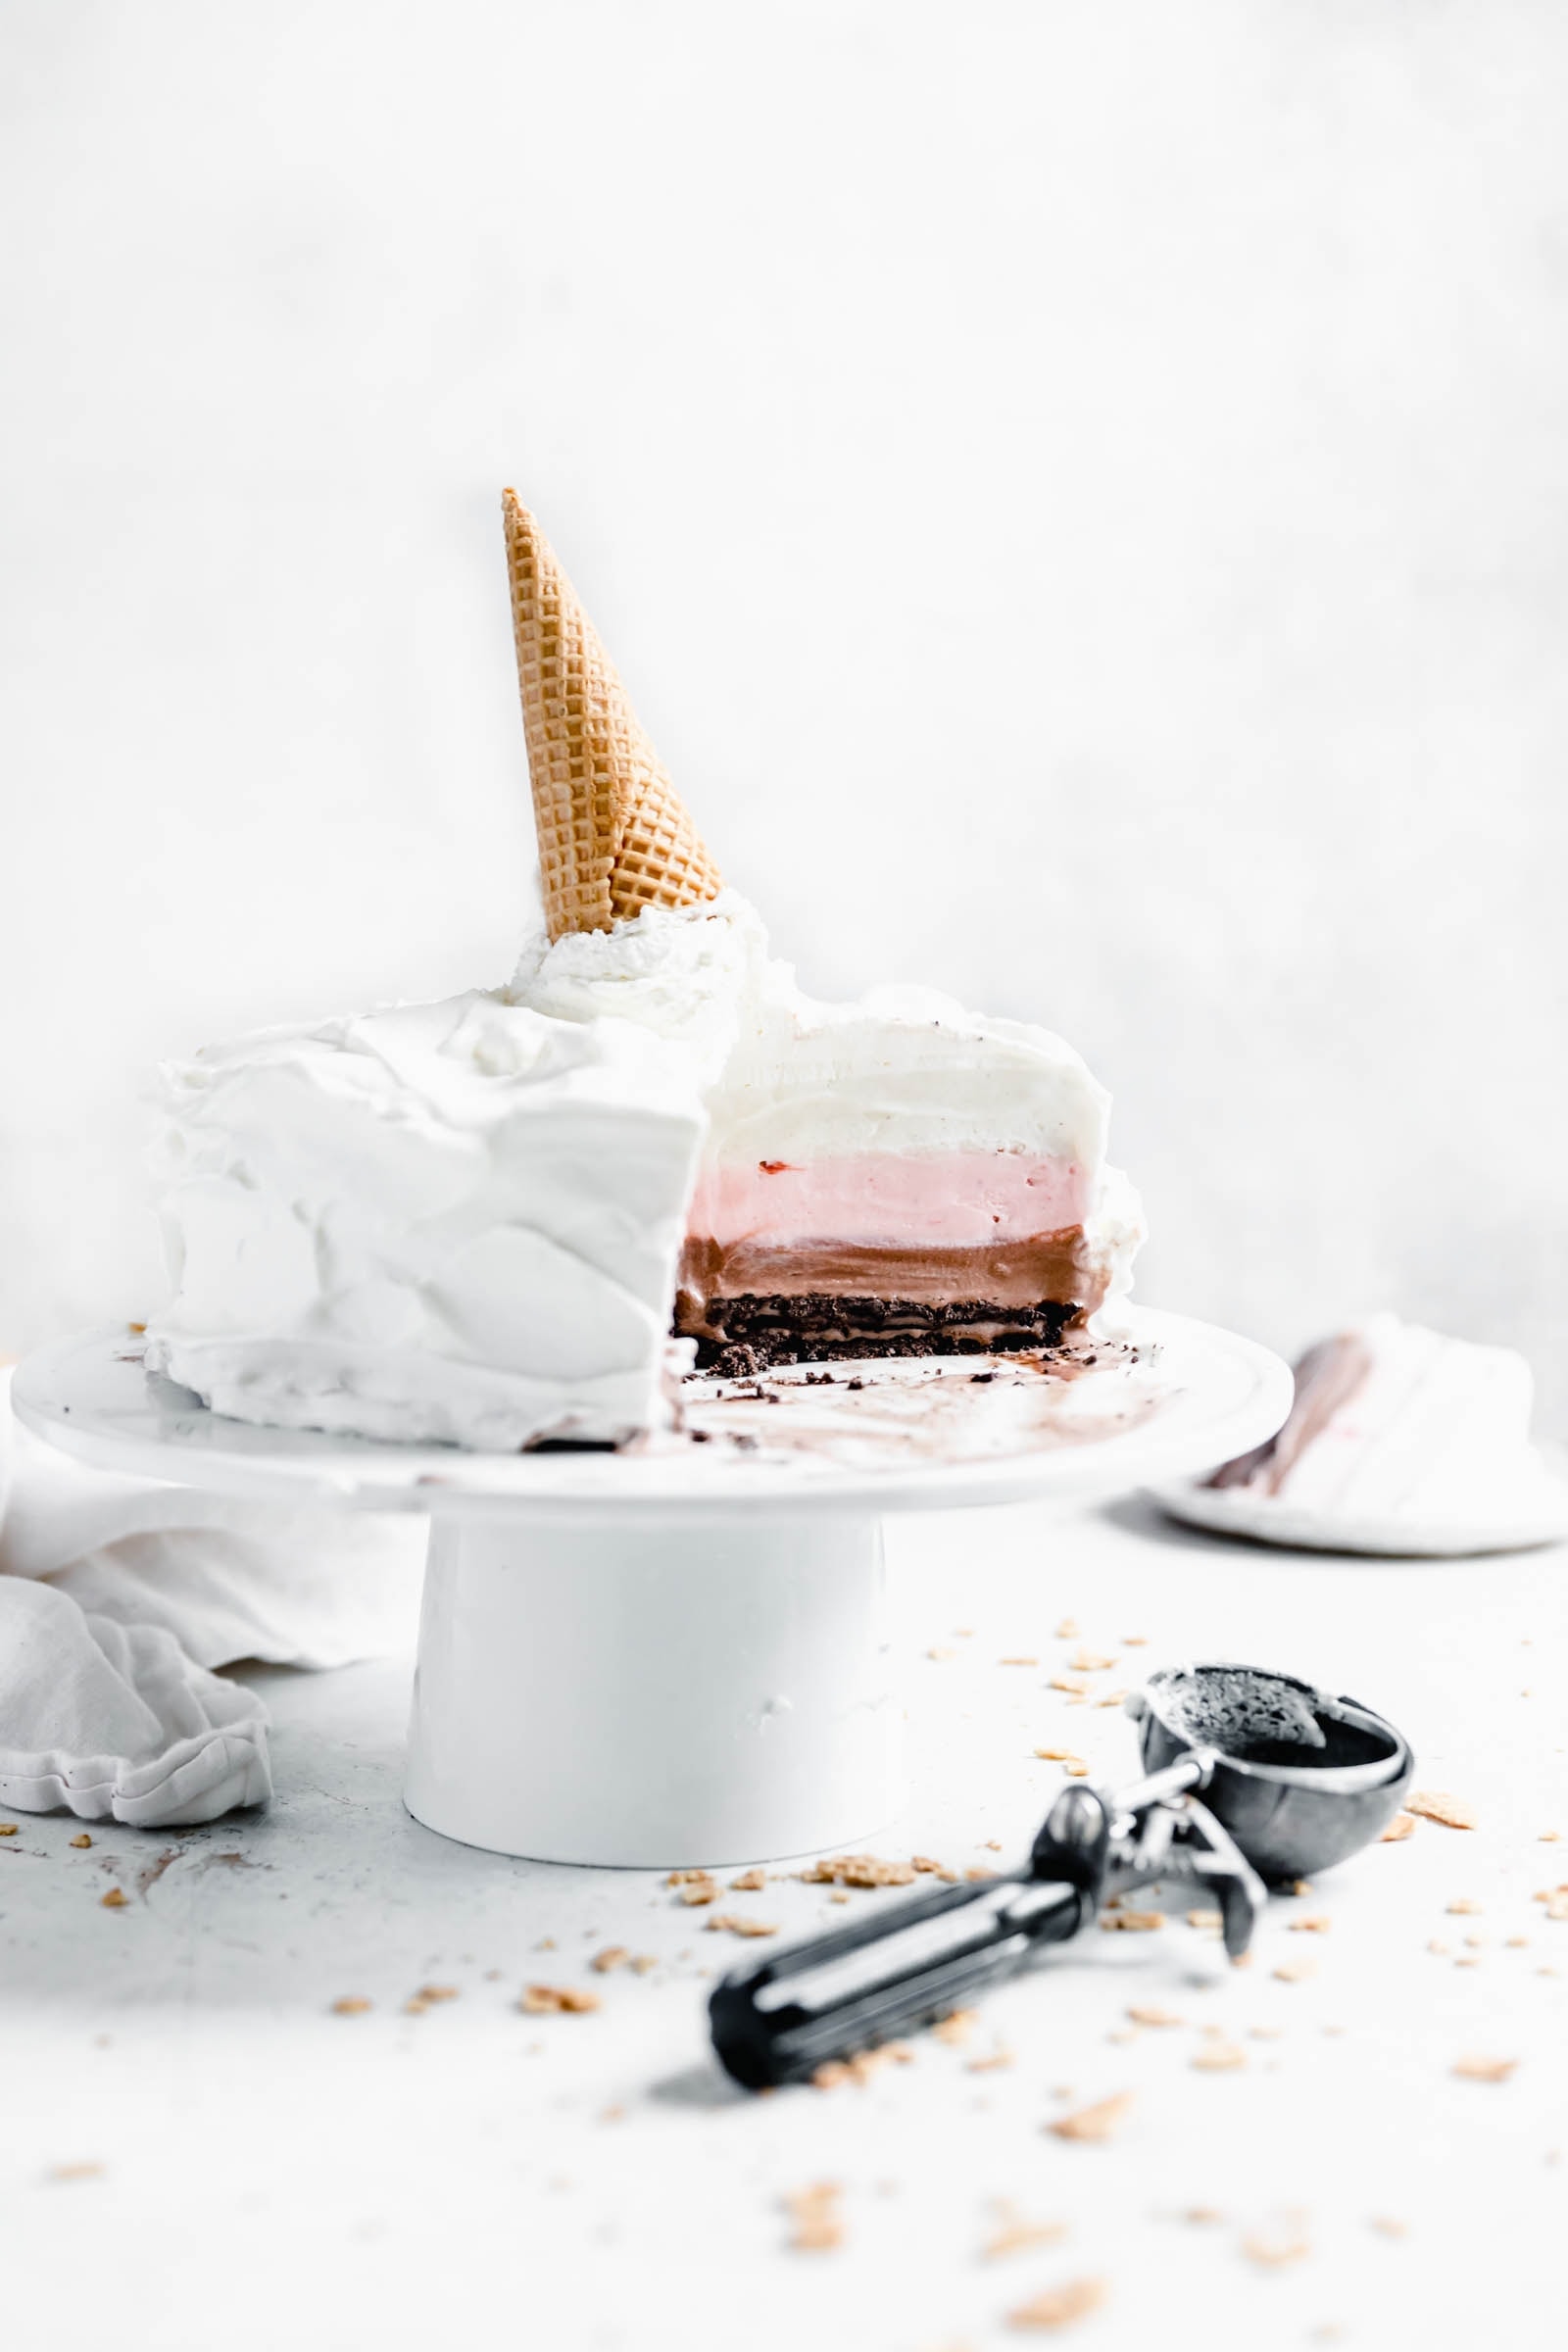 Neapolitan ice cream cake on cake stand with cookie scoop